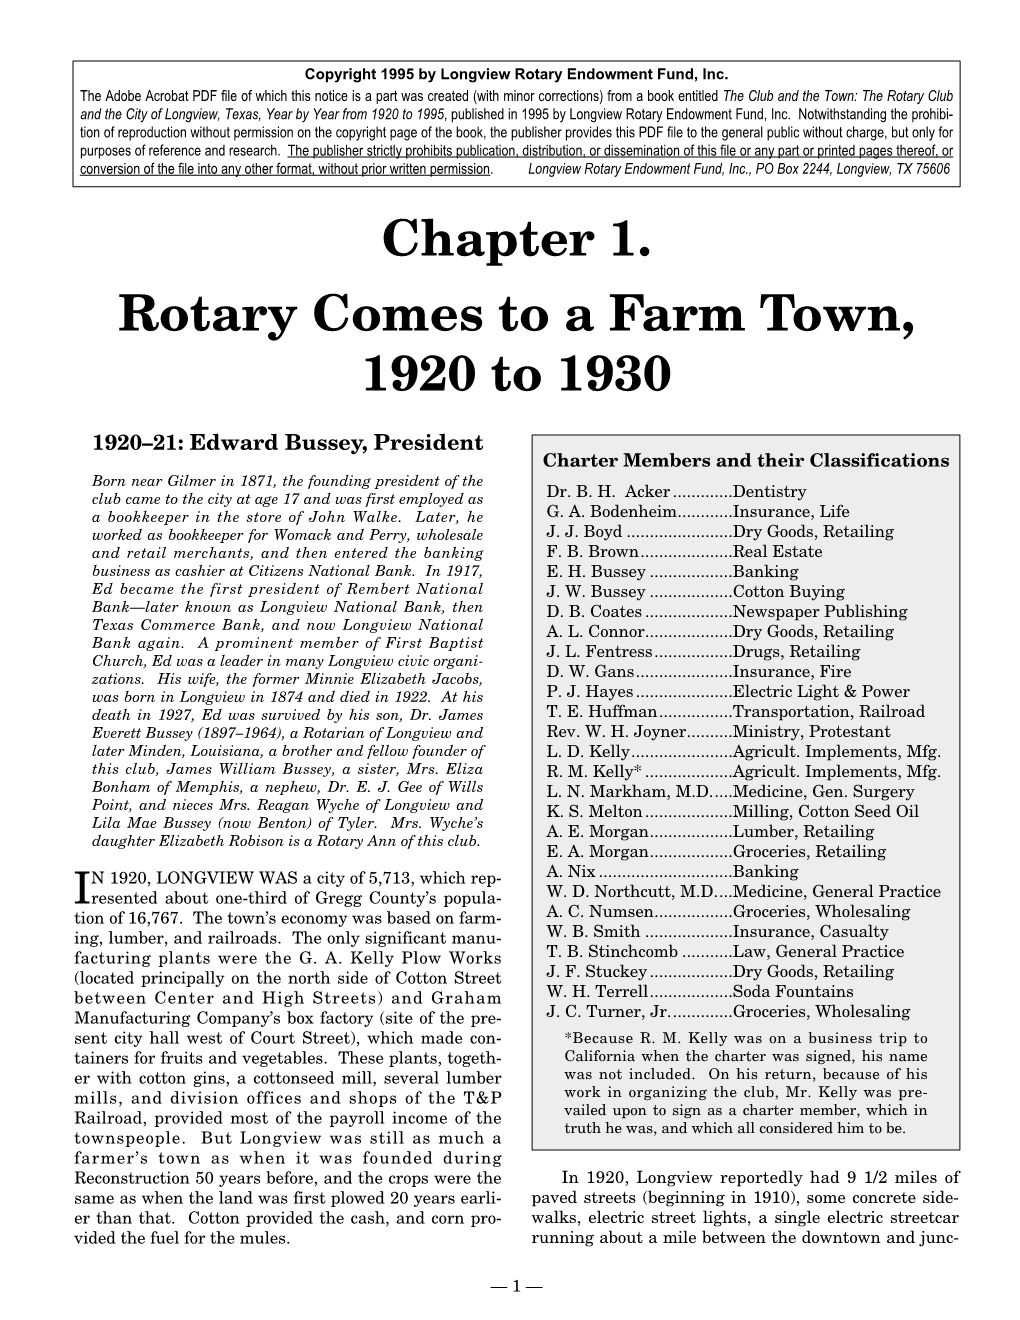 Chapter 1. Rotary Comes to a Farm Town, 1920 to 1930